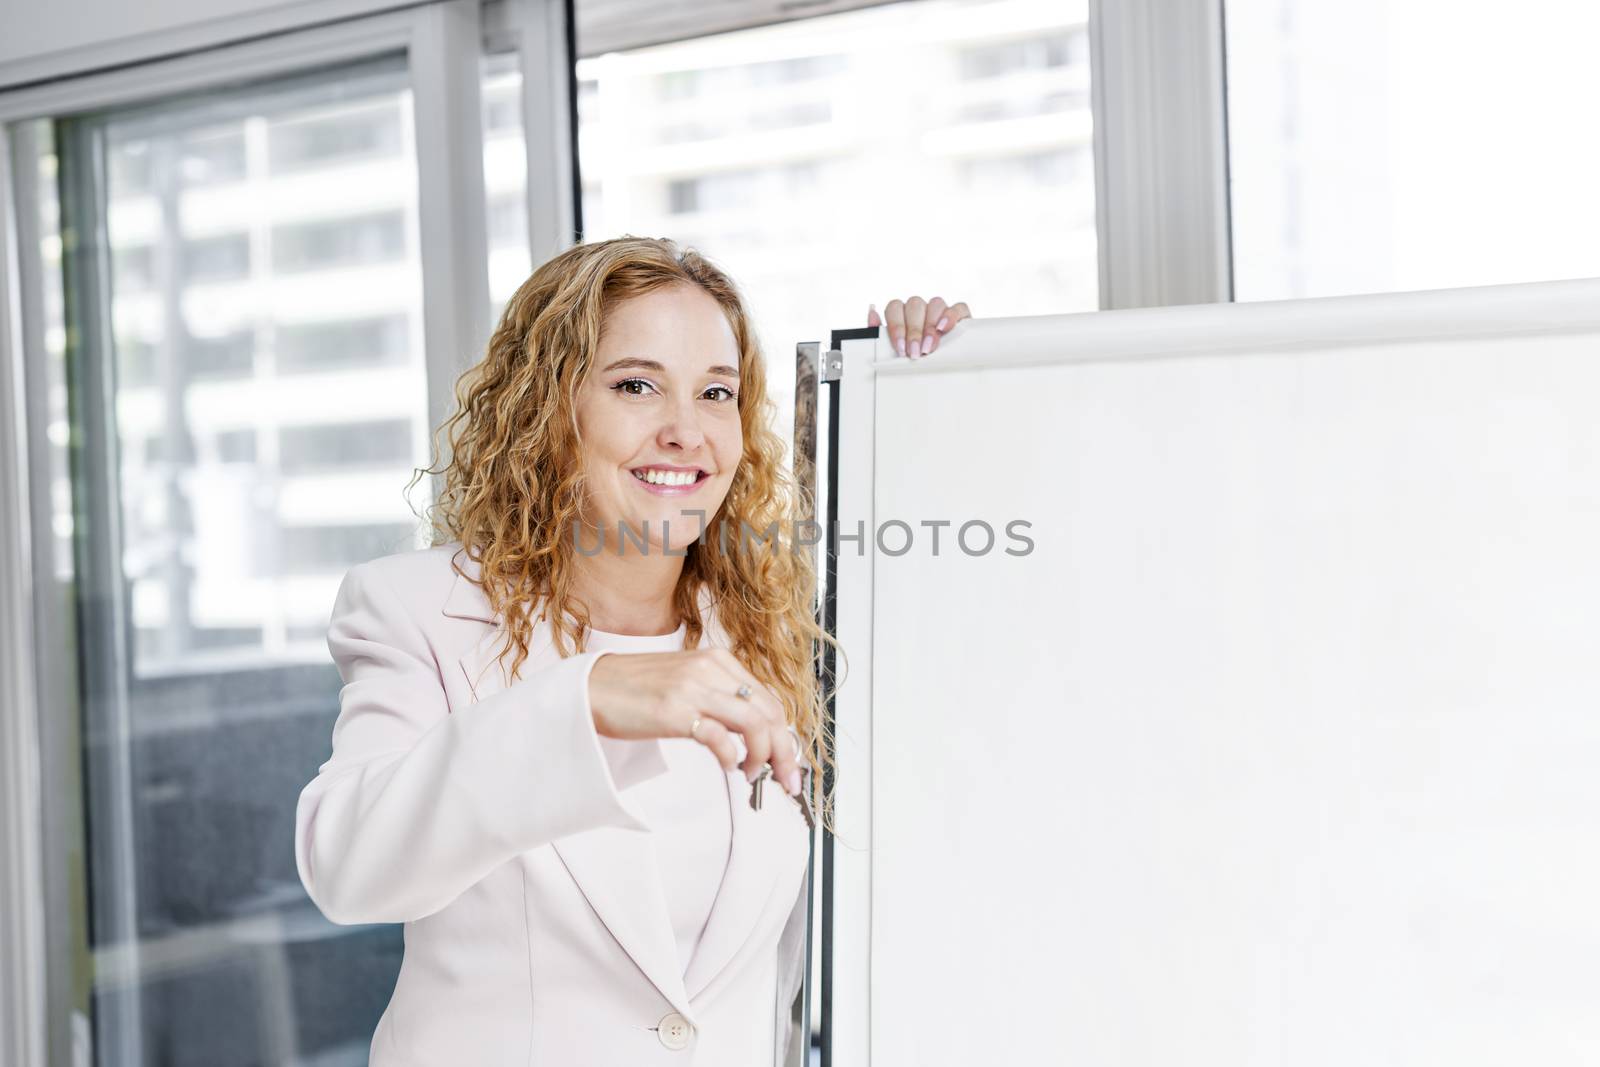 Smiling female real estate agent offering keys standing with blank flip chart